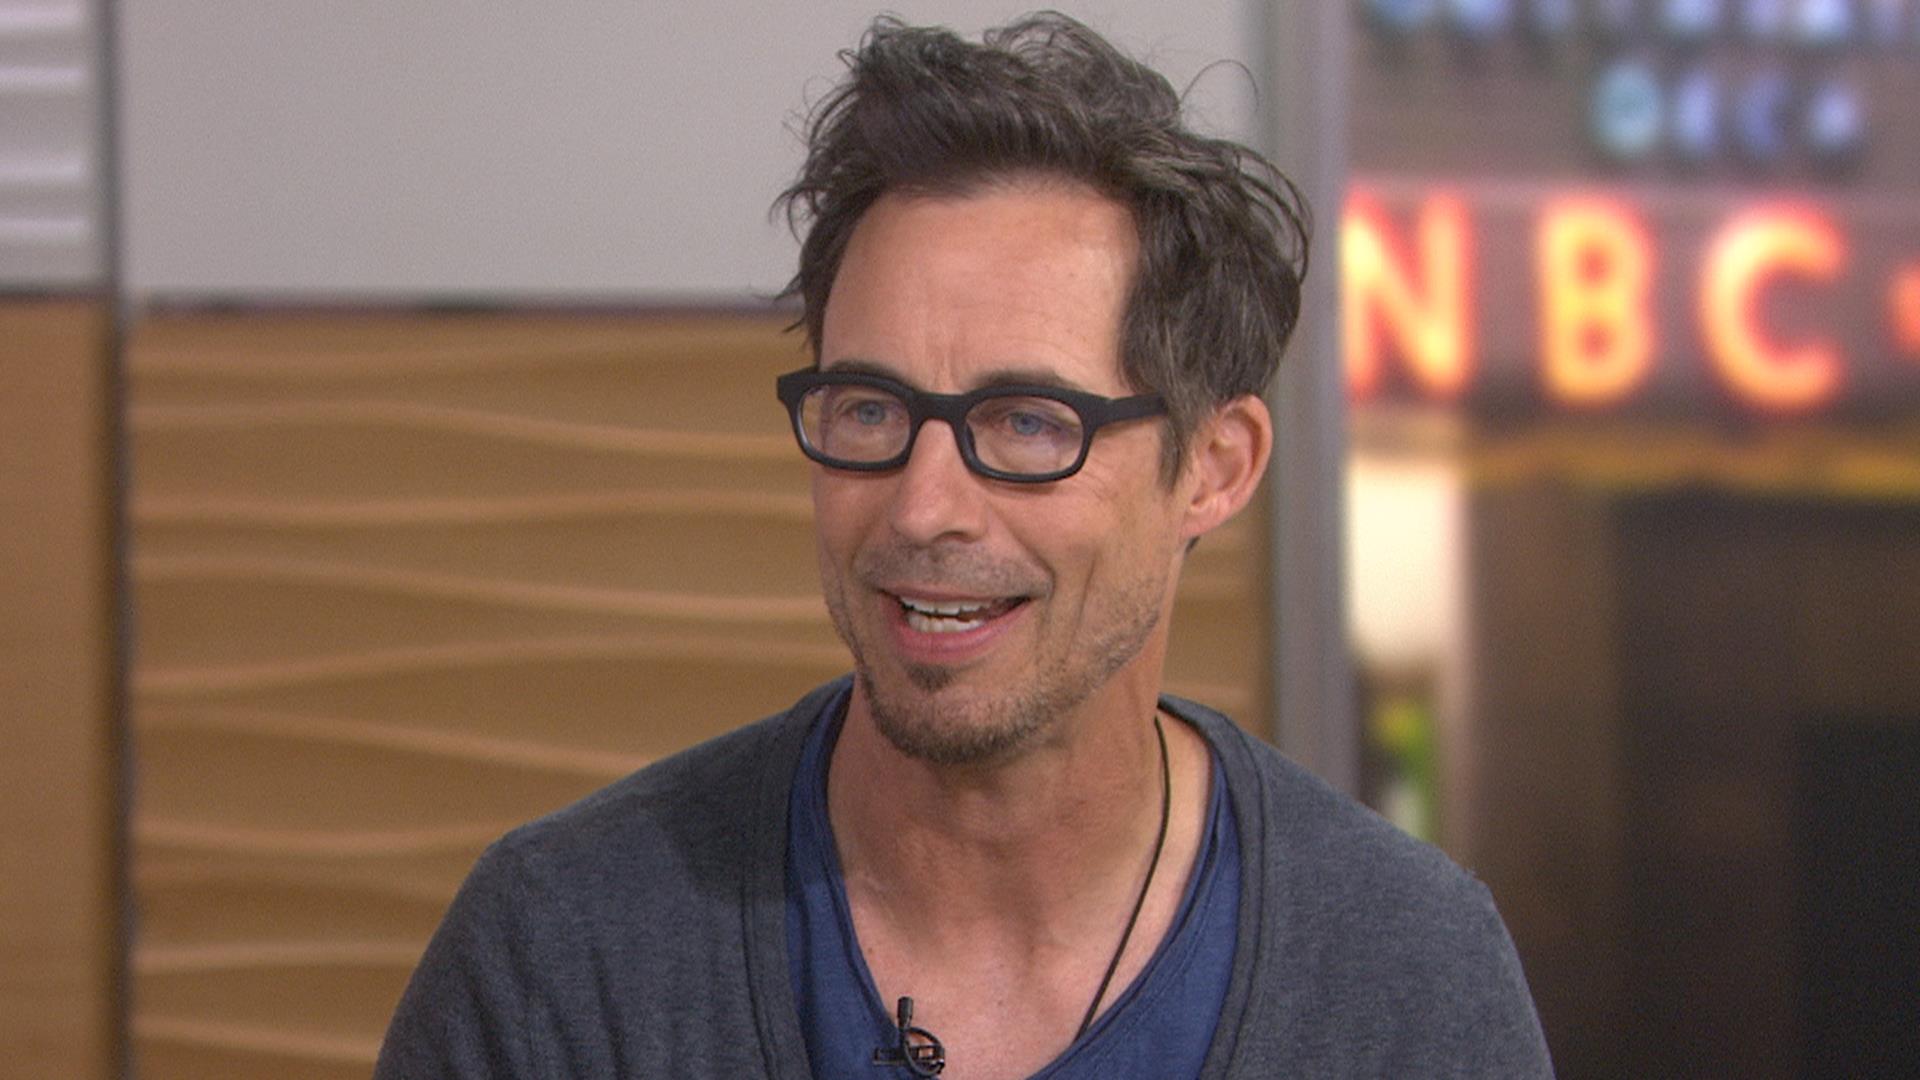 Tom Cavanagh of The Flash My superpower would be eating pizza 1920x1080